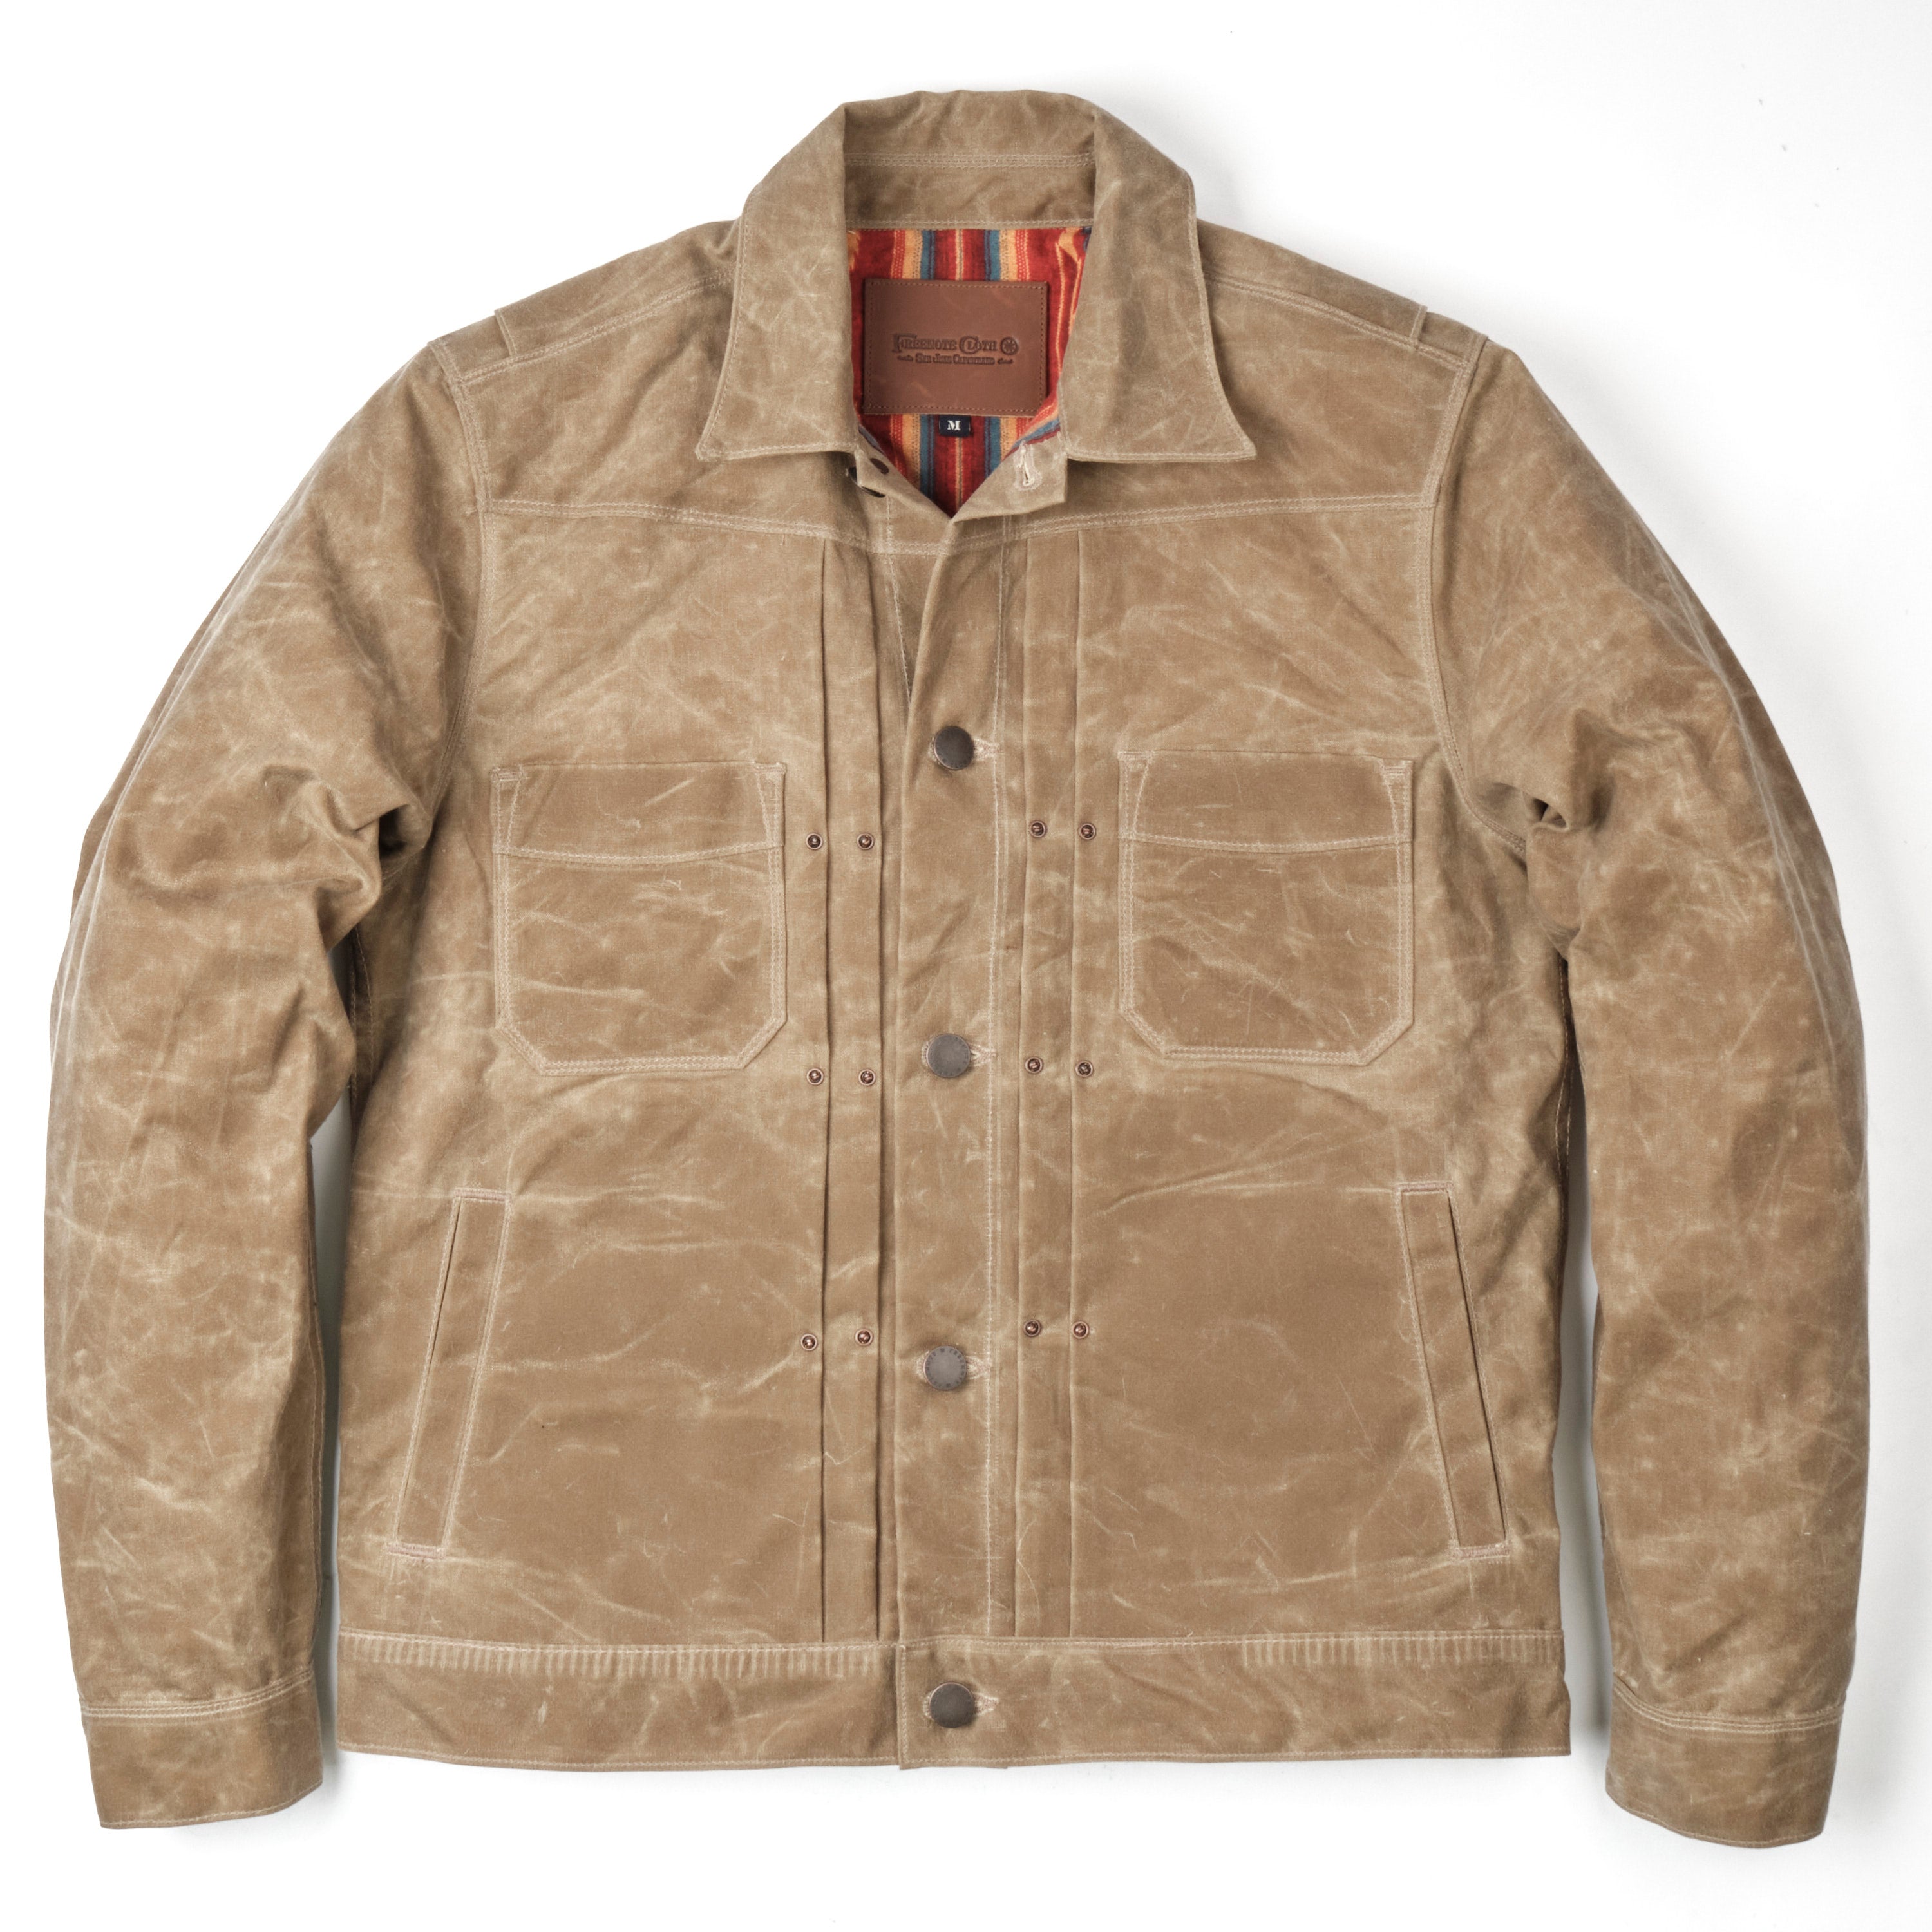 Riders Jacket Waxed Canvas Tobacco Red Interior